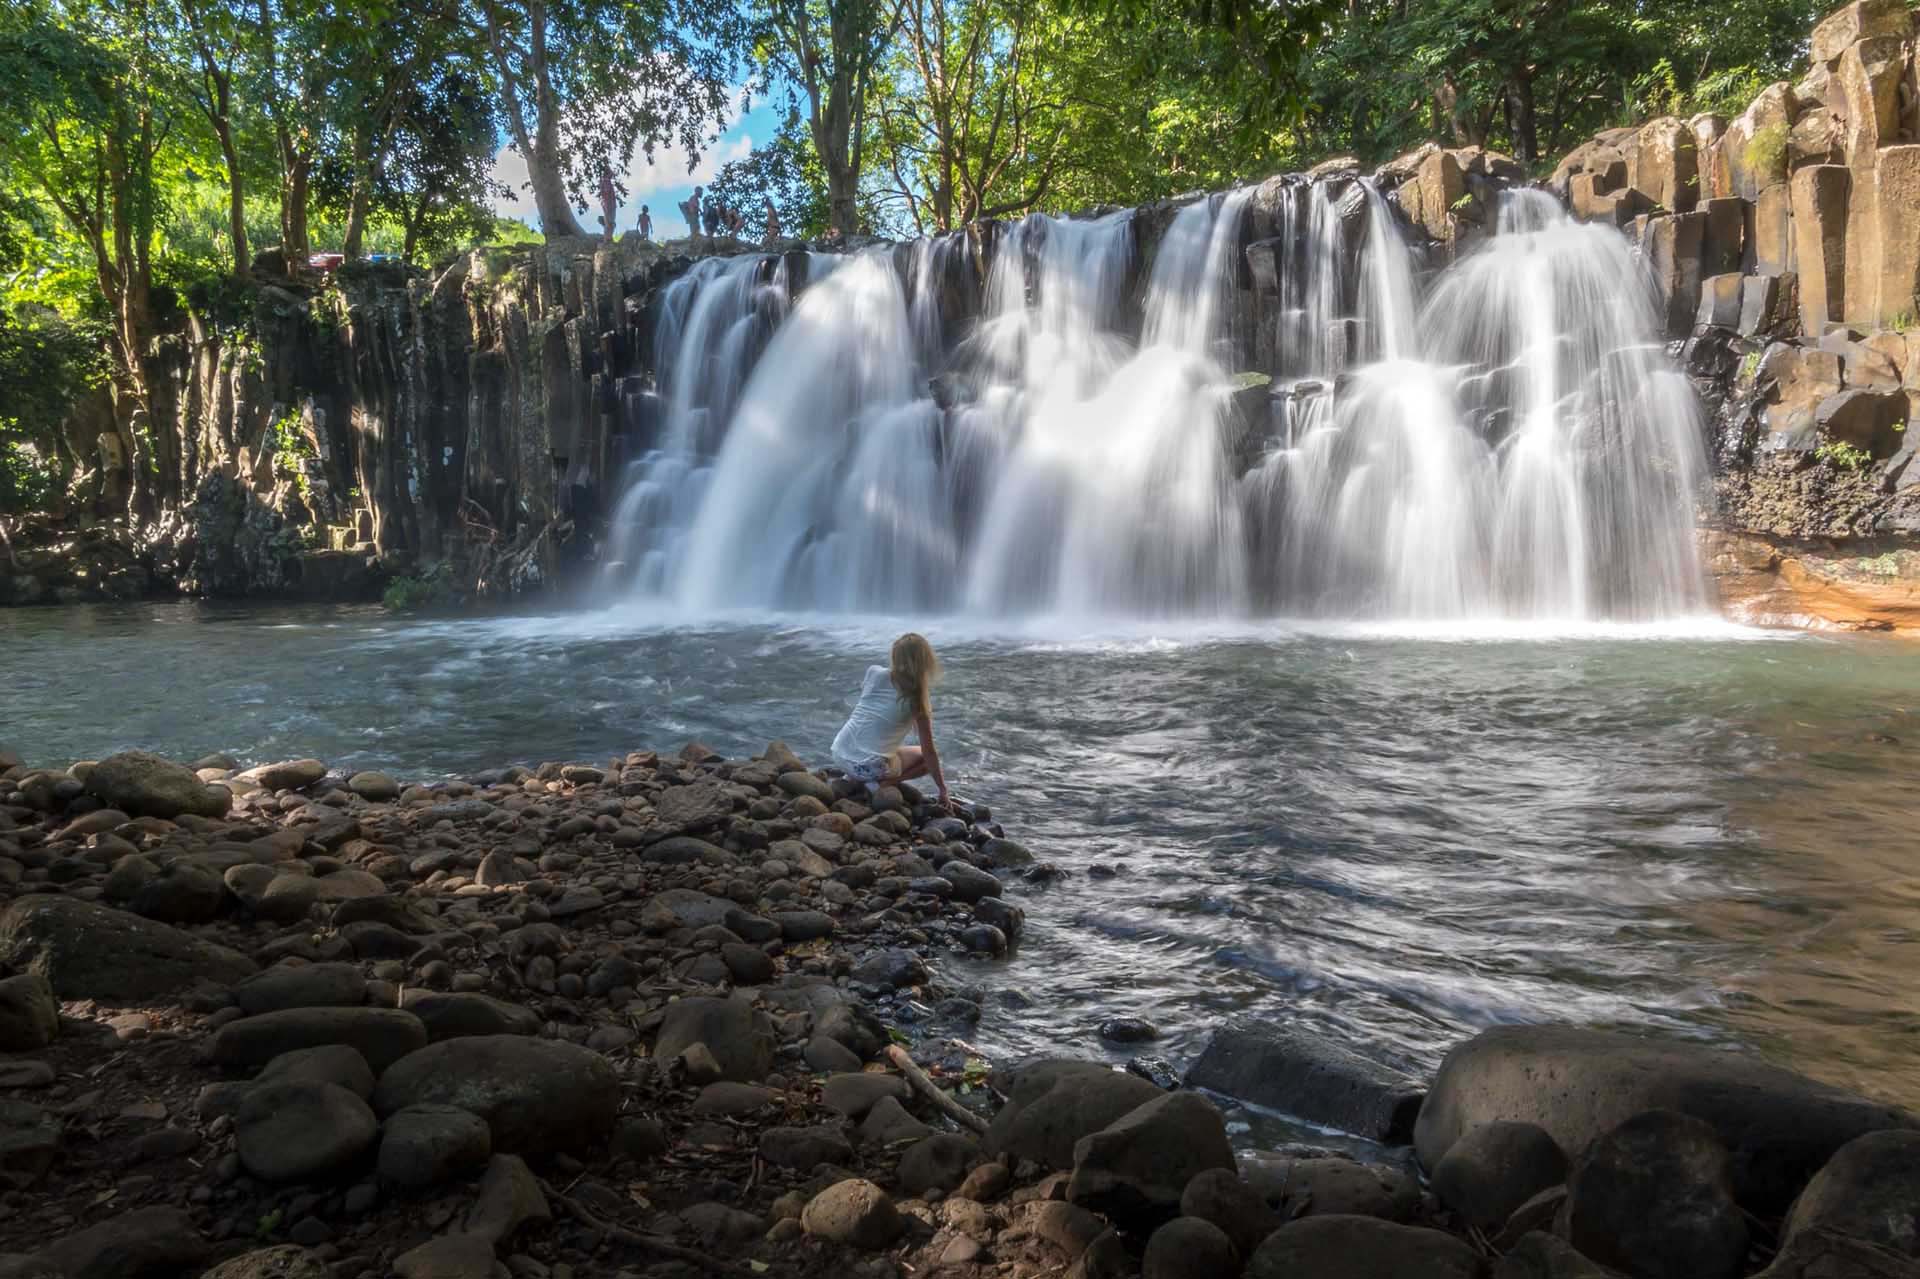 Woman admiring a natural waterfall from the bottom pool in Mauritius